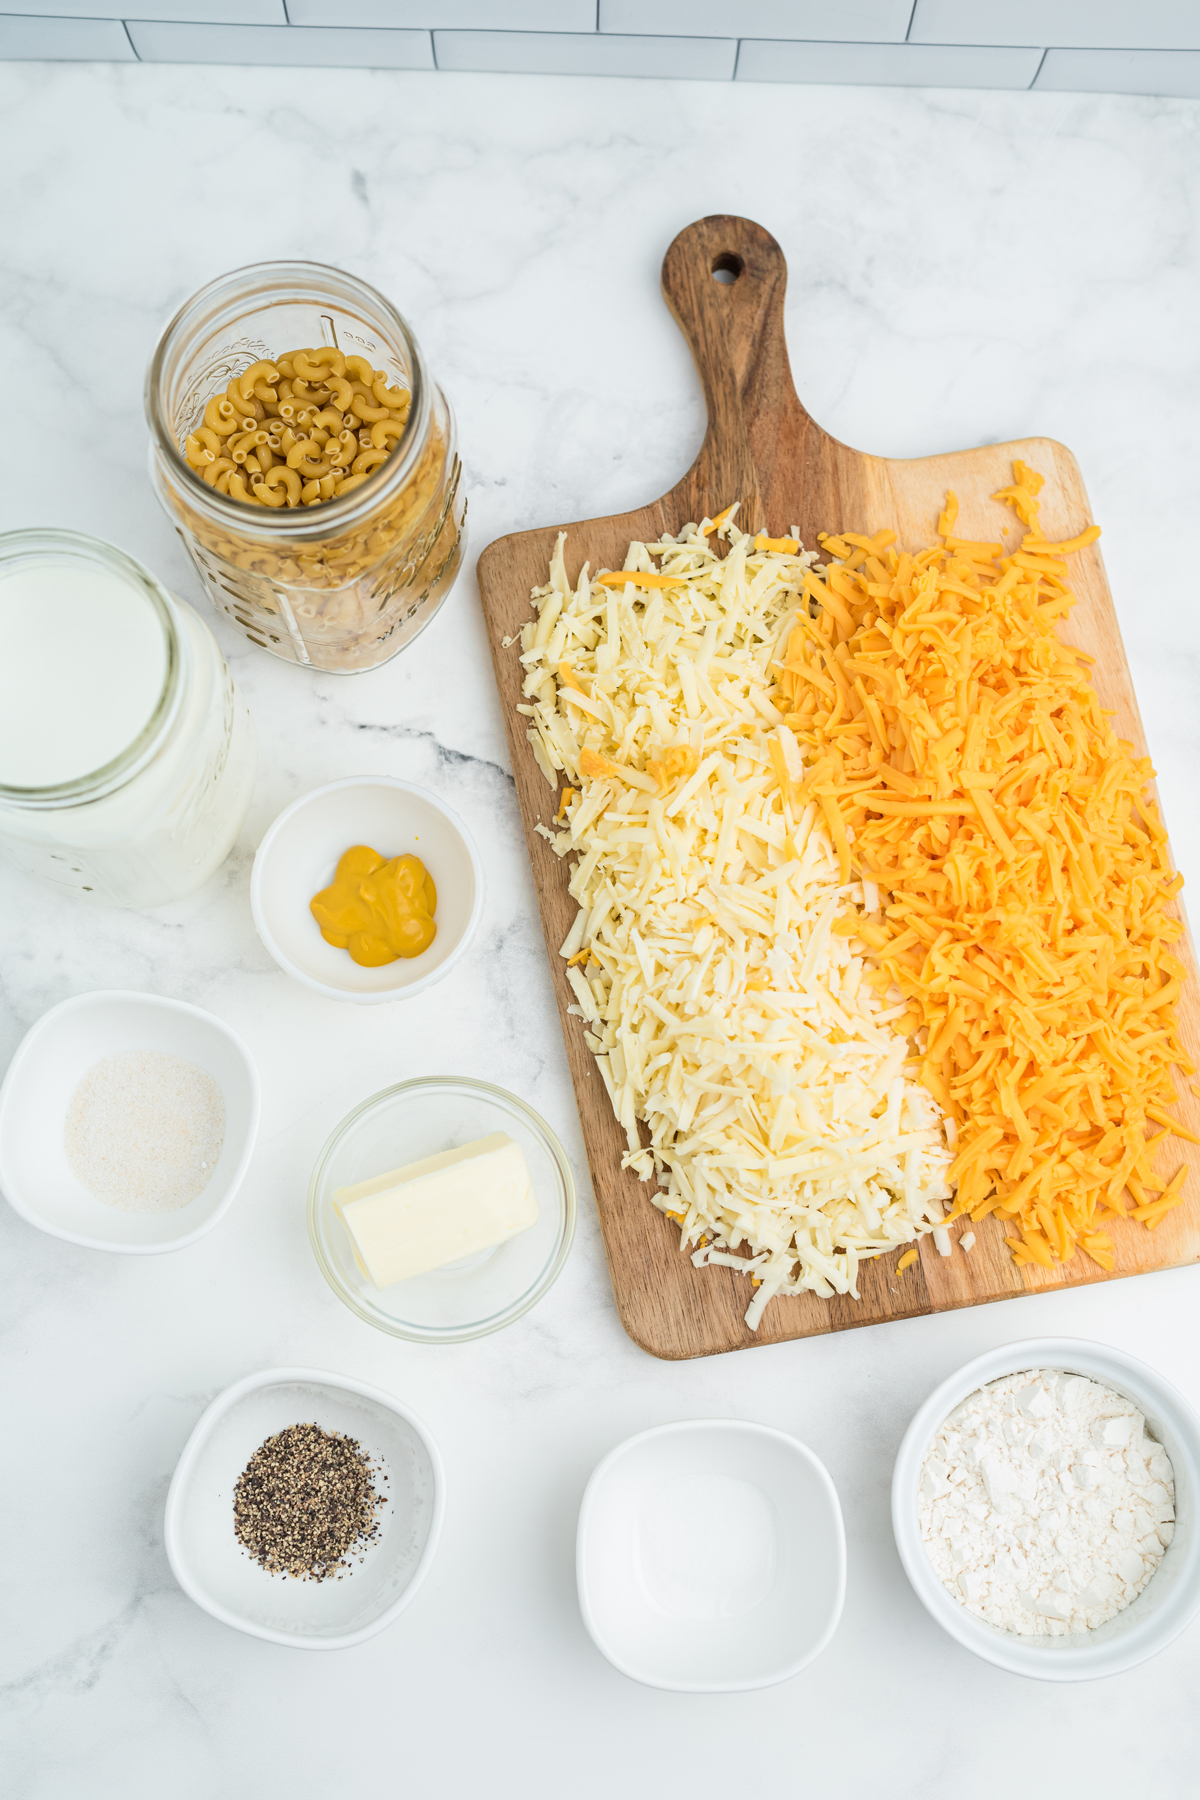 Ingredients for preparing easy baked mac and cheese